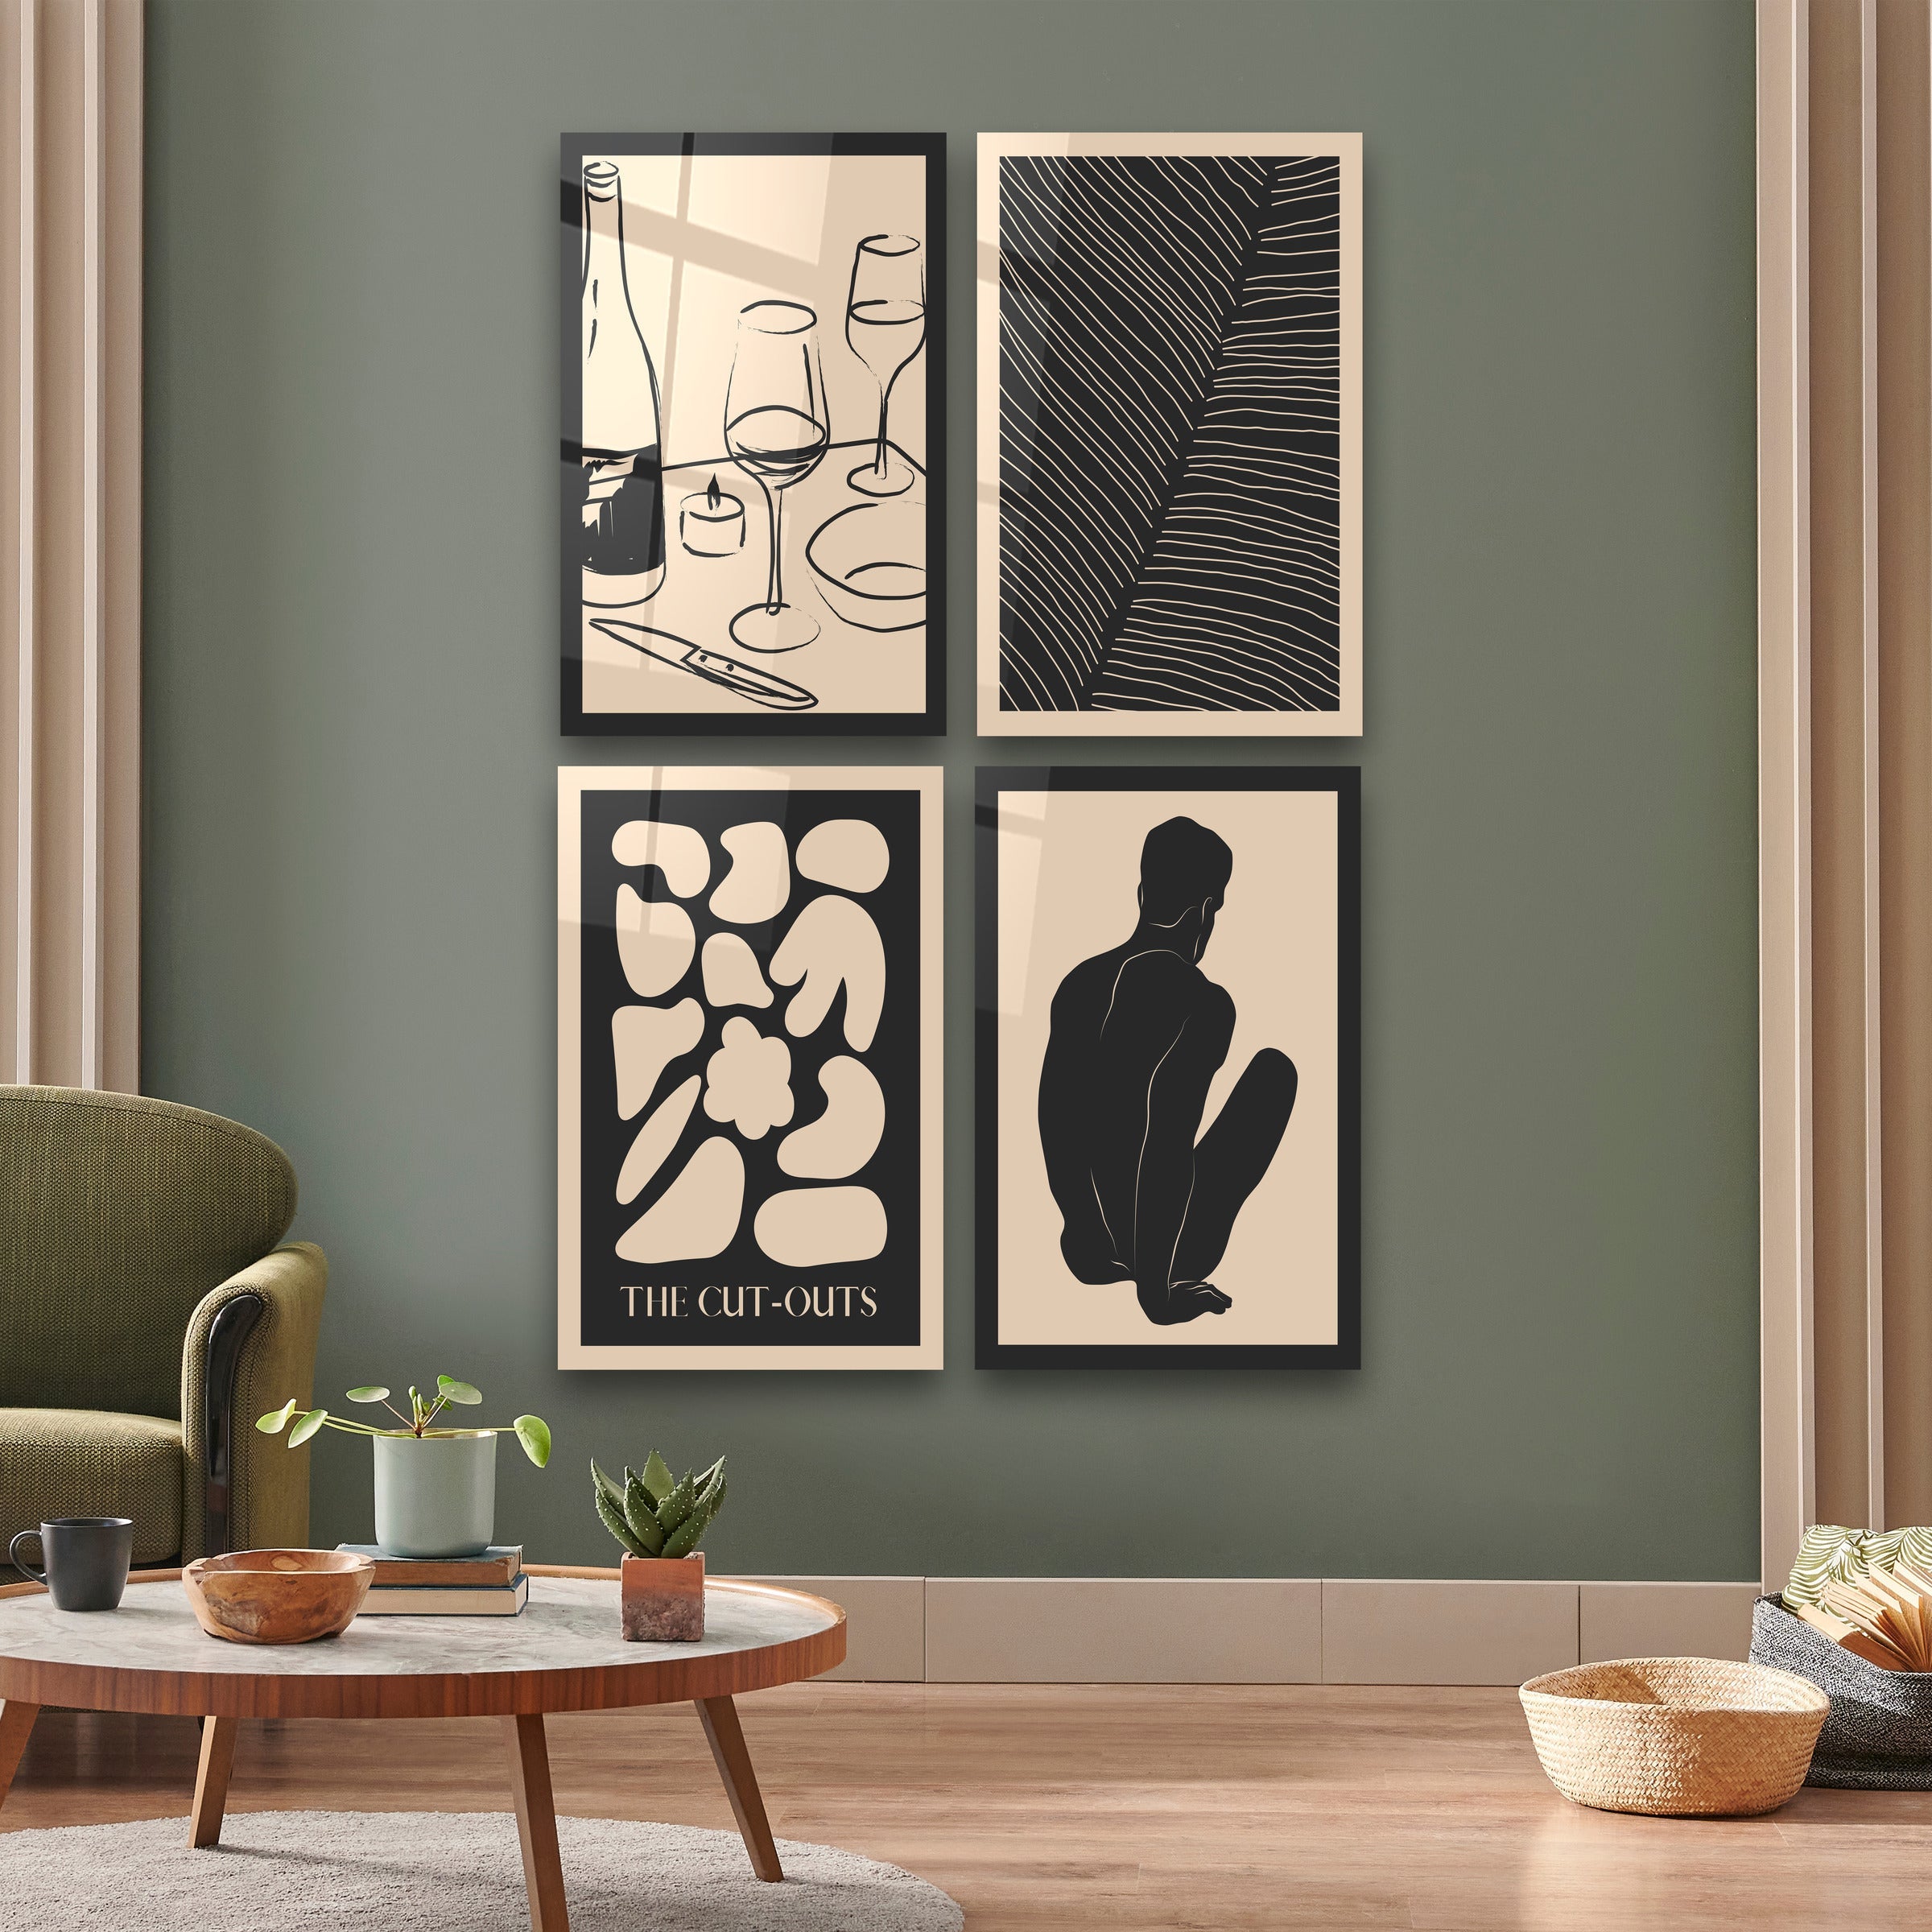 ."The Cut Outs Quadro v4". Contemporary Gallery Collection Glass Wall Art